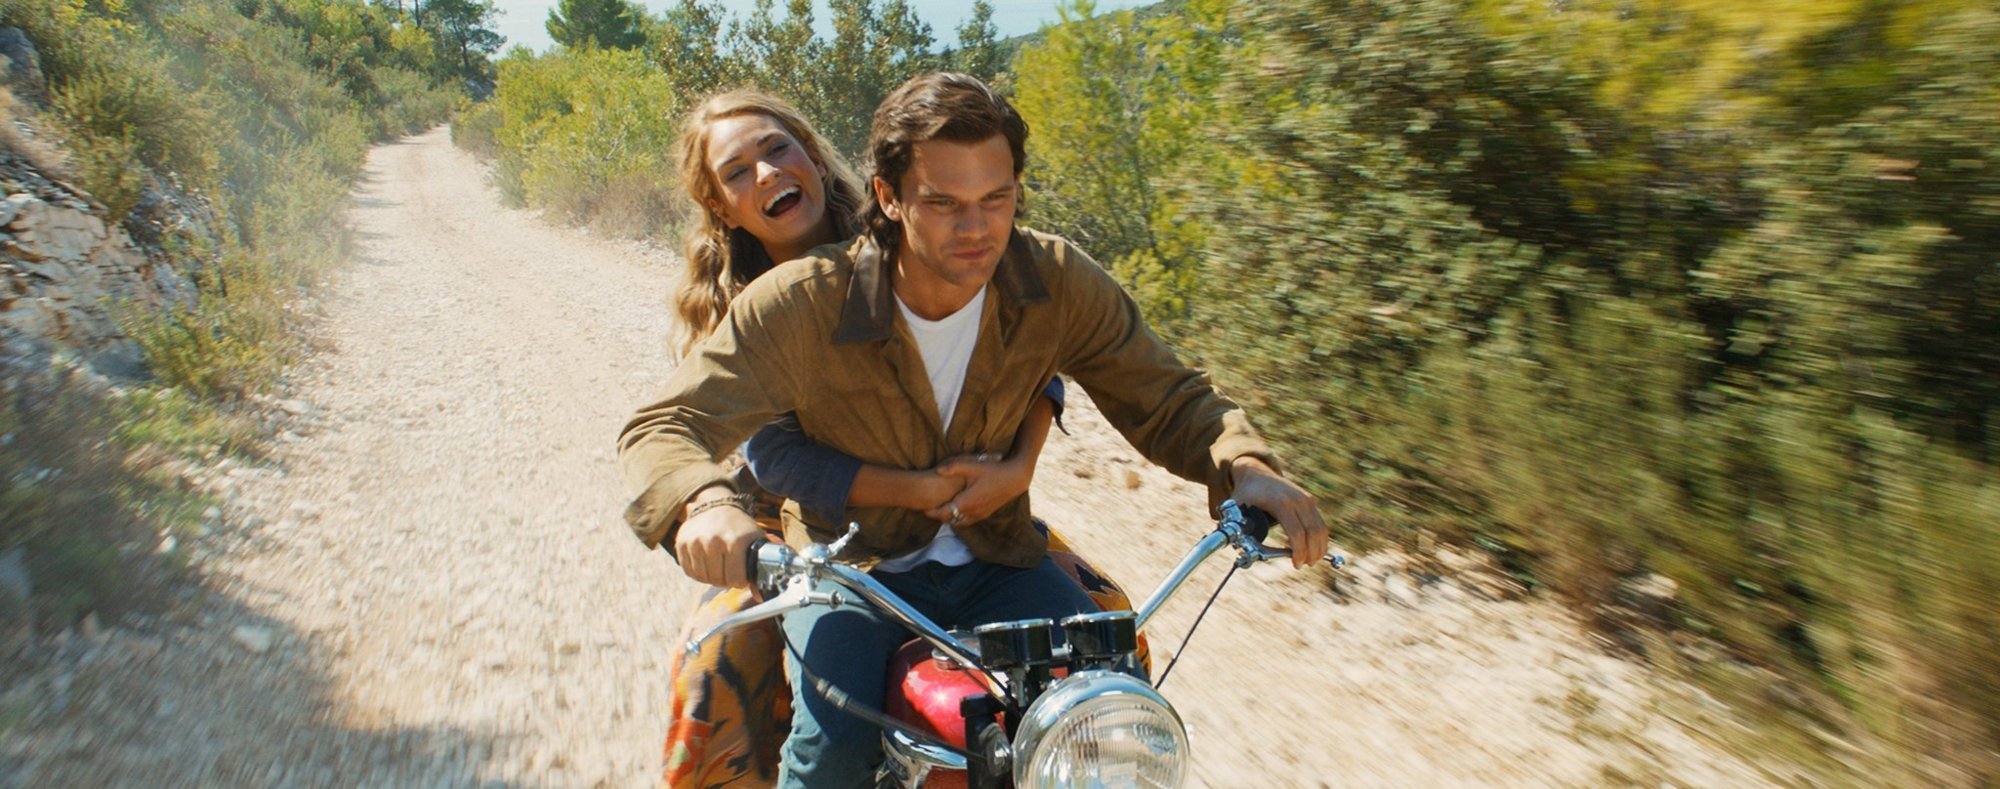 Lily James stars as Young Donna and Jeremy Irvine stars as Young Sam in Universal Pictures' Mamma Mia! Here We Go Again (2018)